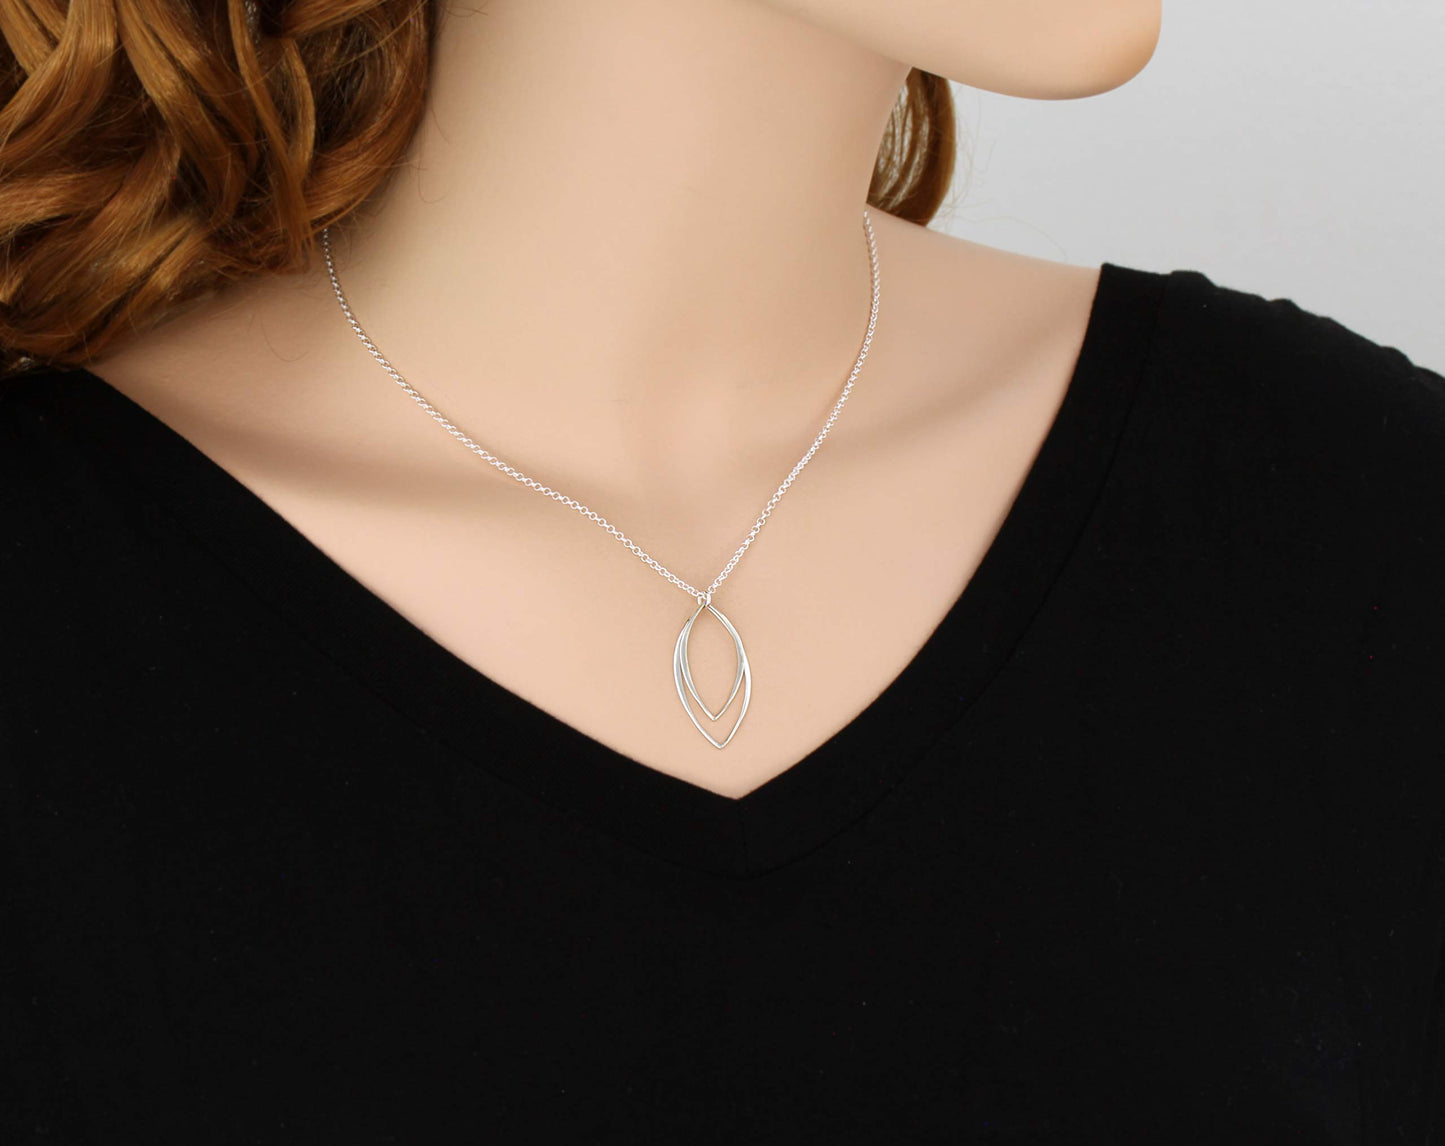 Sterling Silver Marquise Necklace • Modern Minimalist Jewelry • Simple Delicate Pendant • Handmade Necklace • Necklaces for Women • Gifts for Teen Teenage Girl Gift • Geometric Shape • Sexy Edgy